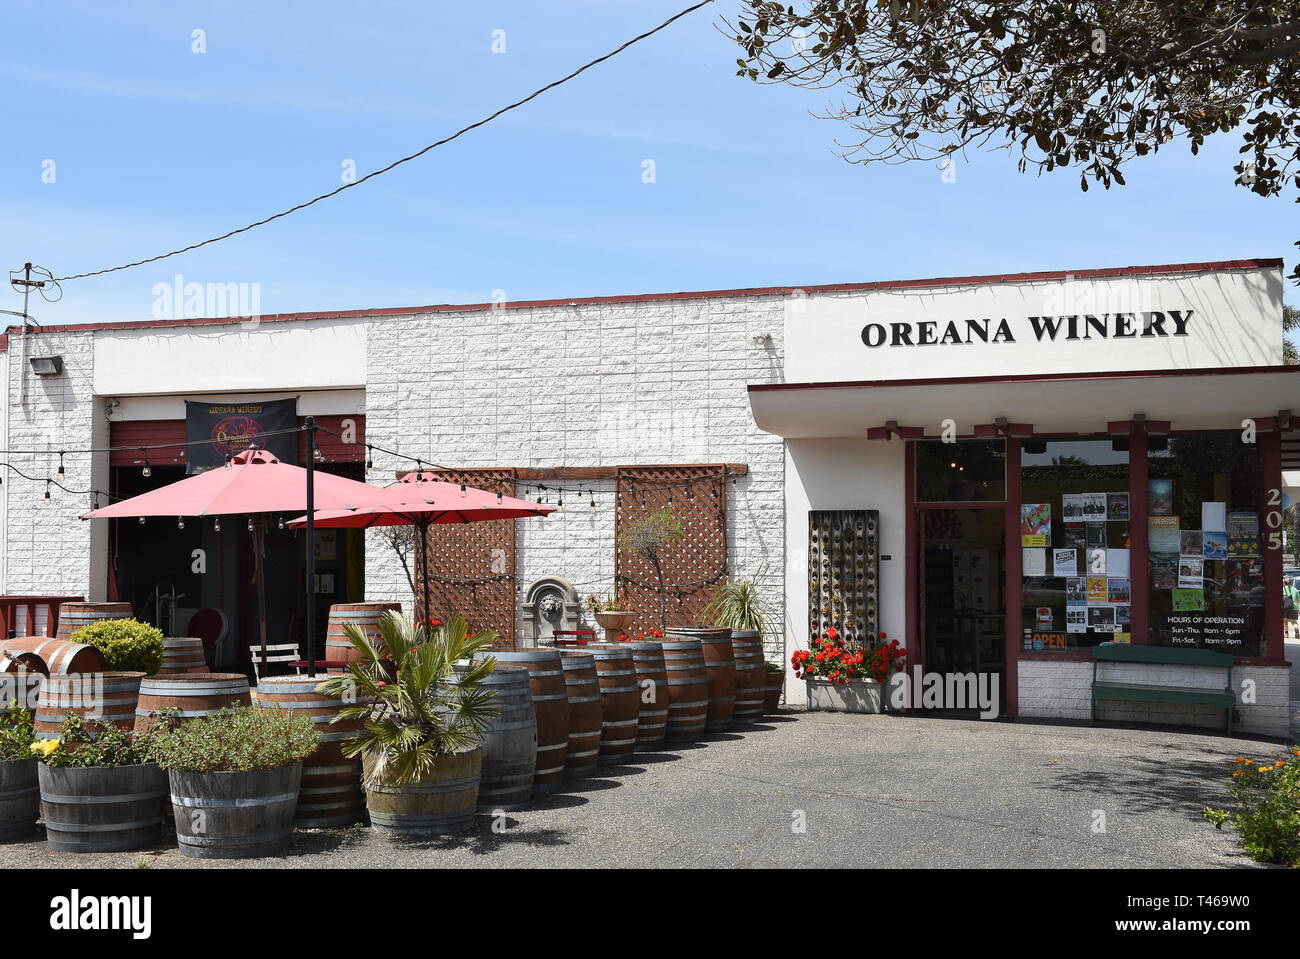 SANTA BARBARA, CALIFORNIA - APRIL 11, 2019: The Oreana Winery in an old tire shop is now an eclectic winery and tasting room focused on Pinot Noir and Stock Photo